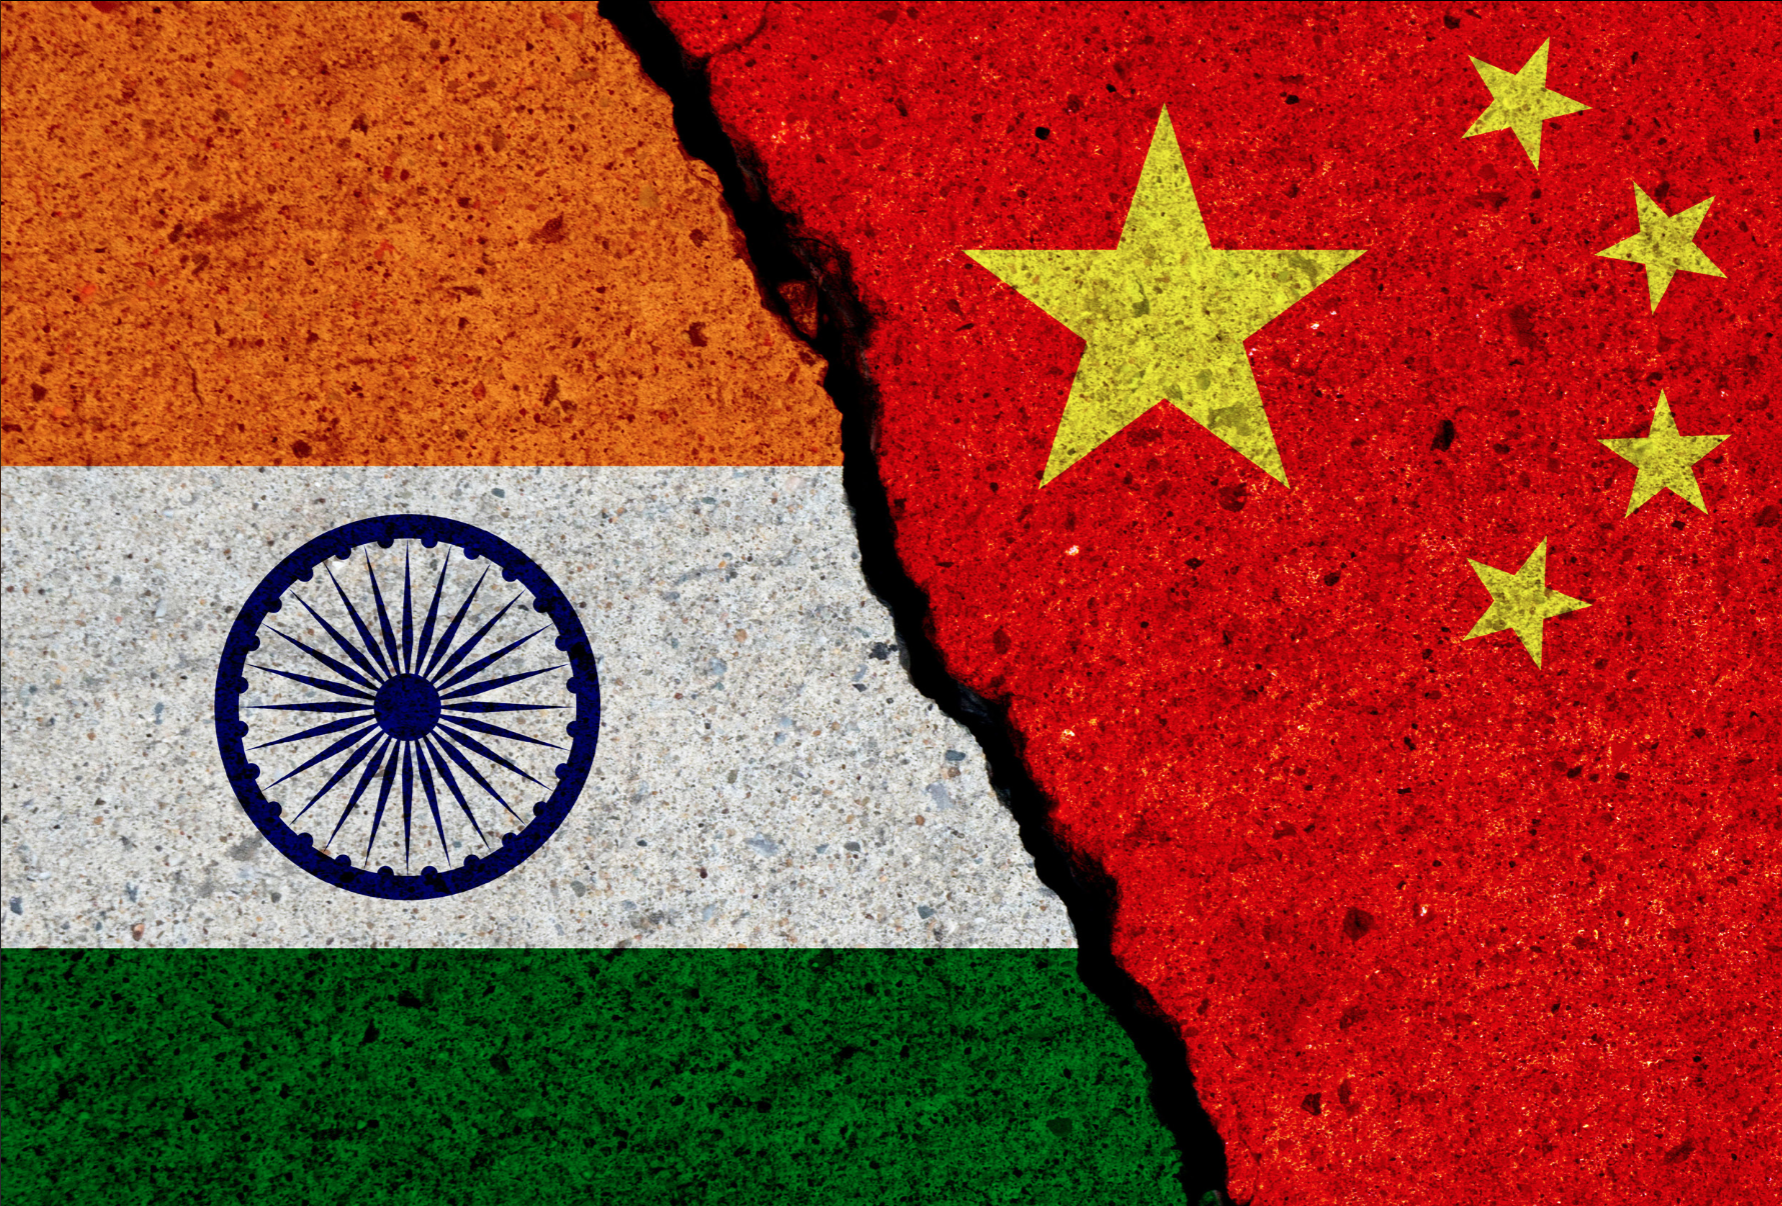 How Chinese networks eye India’s domestic events to spread disinformation: Logically